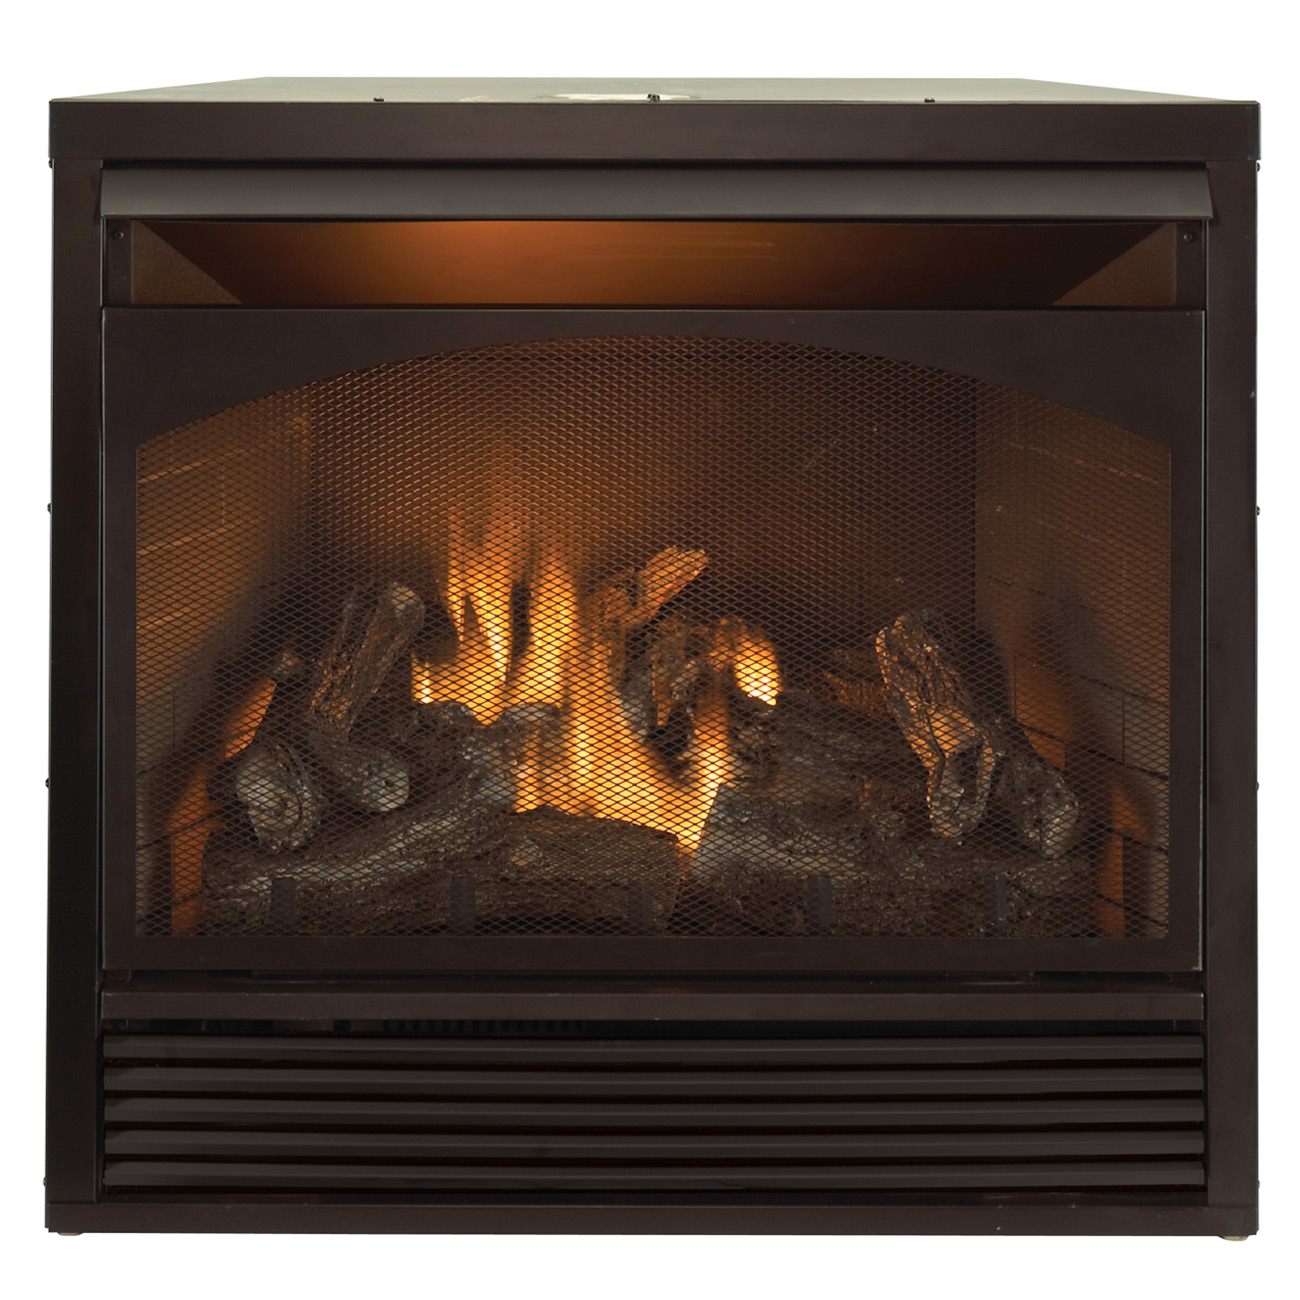 Installing A Vent Free Gas Fireplace Insert Gas Fireplace Insert Dual Fuel Technology with Remote Control